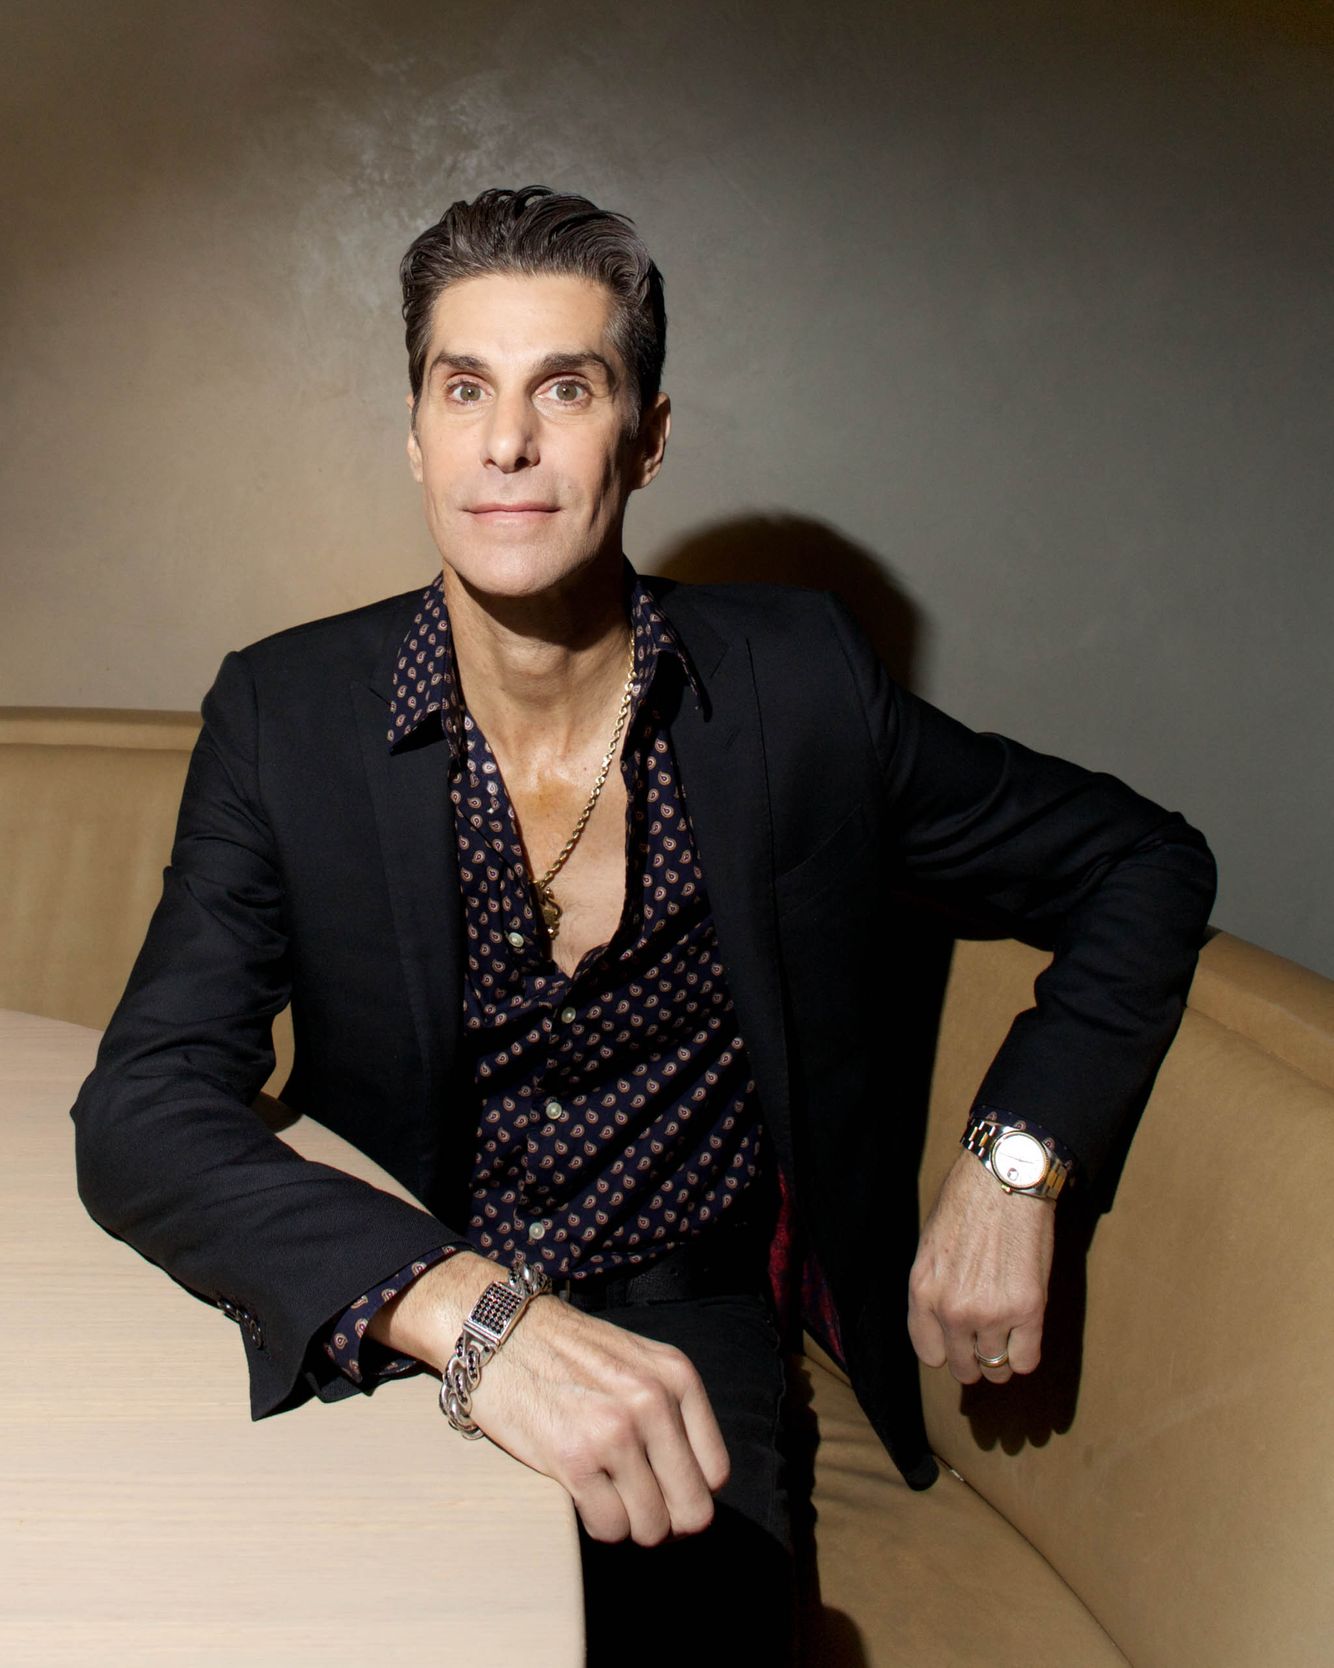 Perry Farrell By Chicago Celebrity Portrait Photographer Jeff Schear